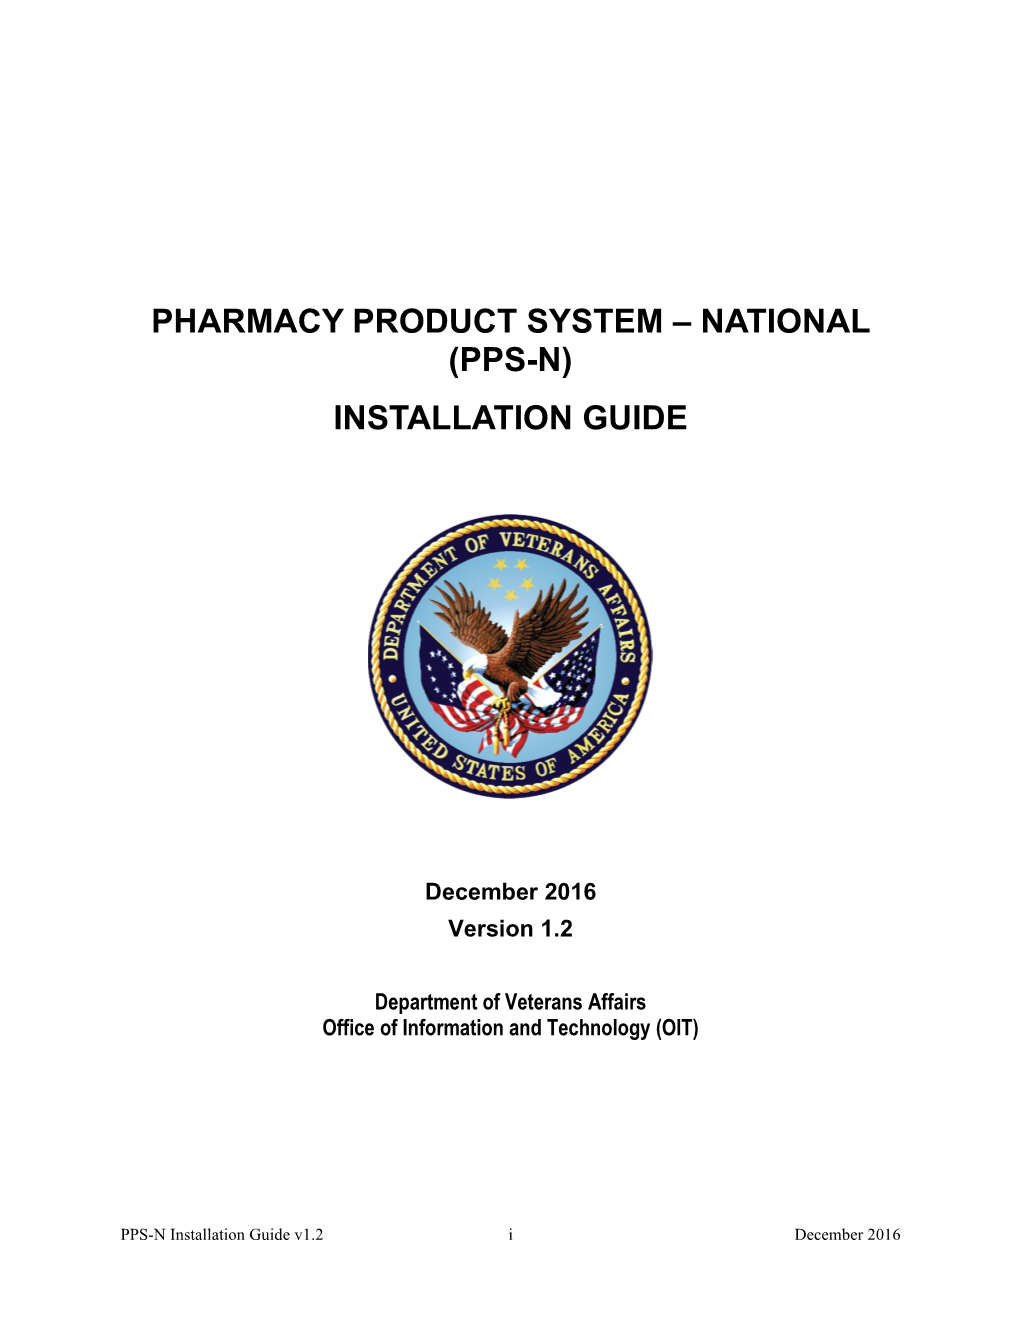 Pharmacy Product System – National (Pps-N) Installation Guide